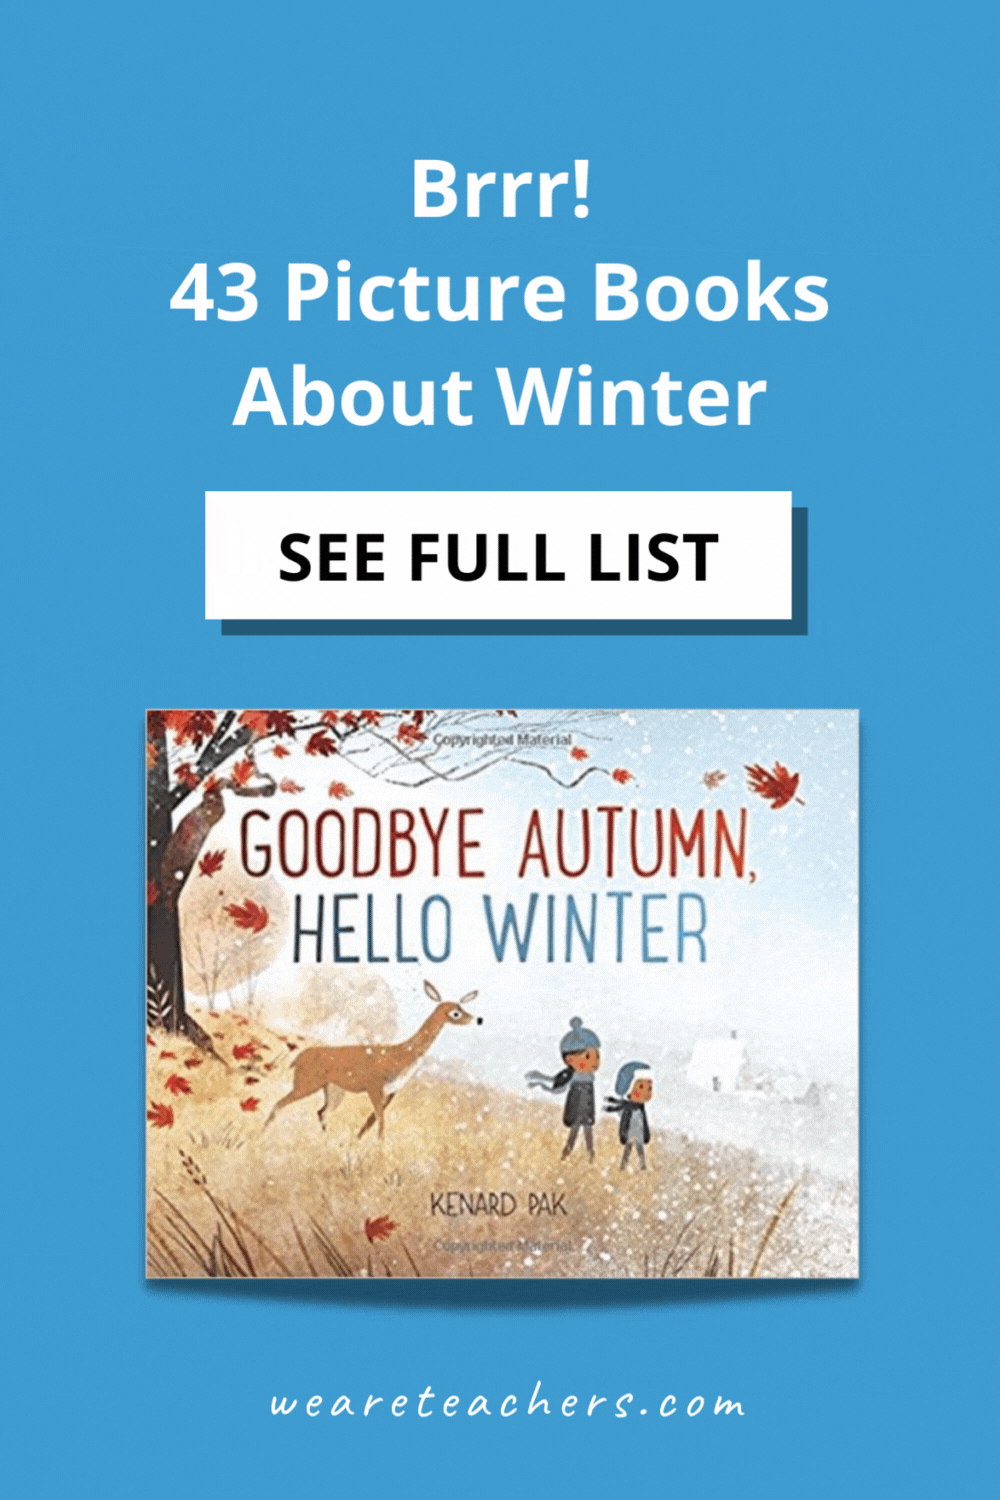 Here are our favorite winter picture books to read to children when it's too cold to go outside, but all they want to talk about is snow.